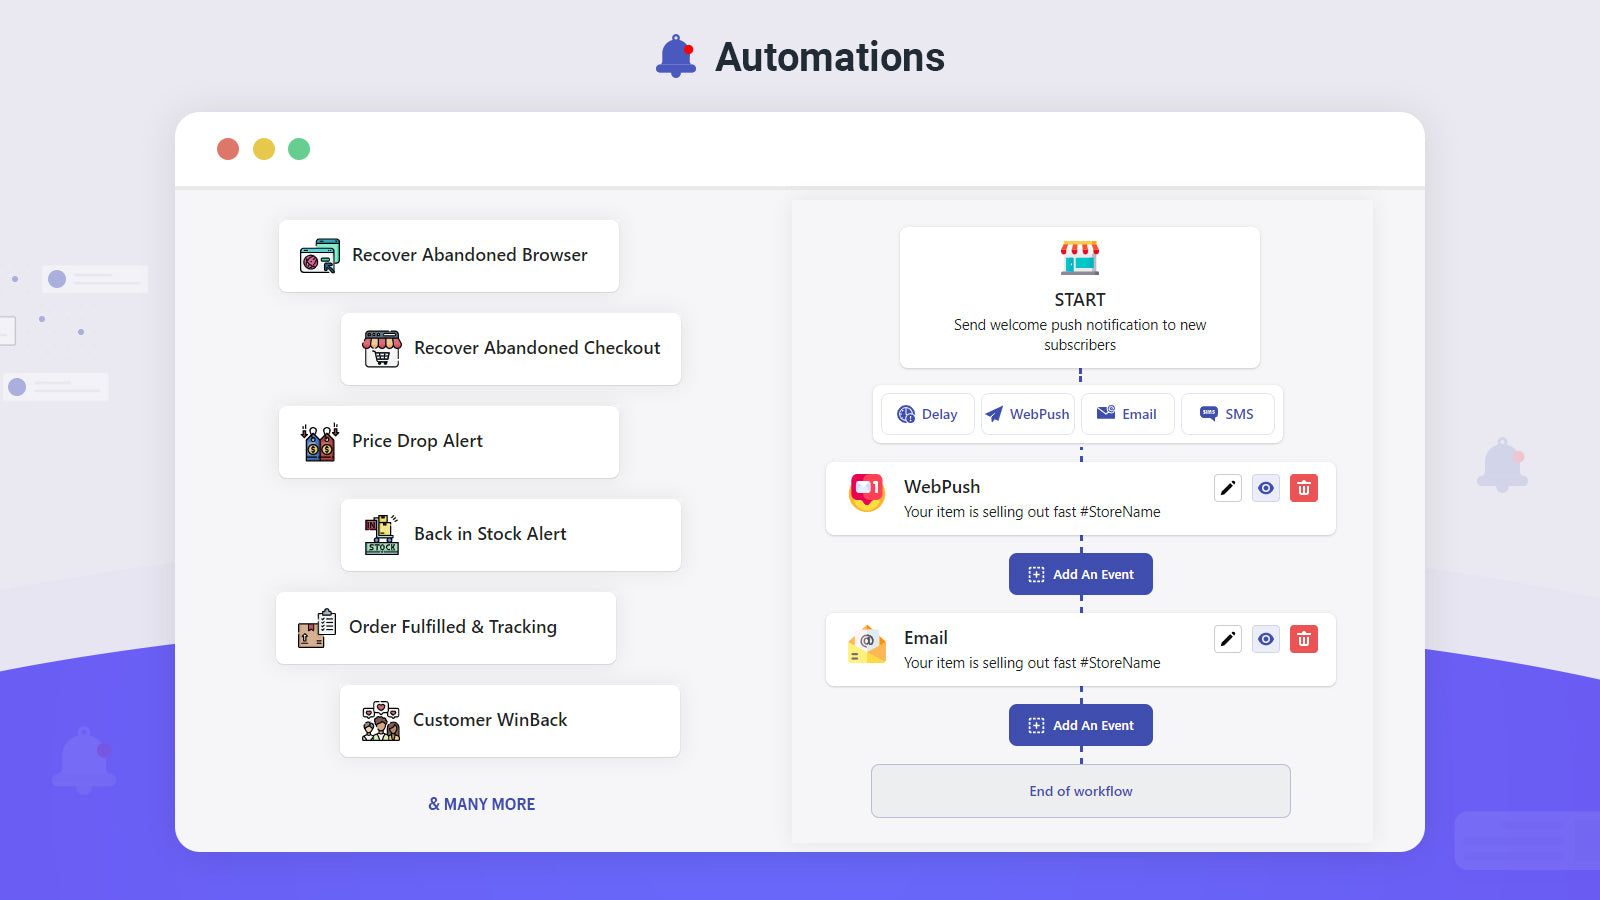 all major automation available to grab more sales